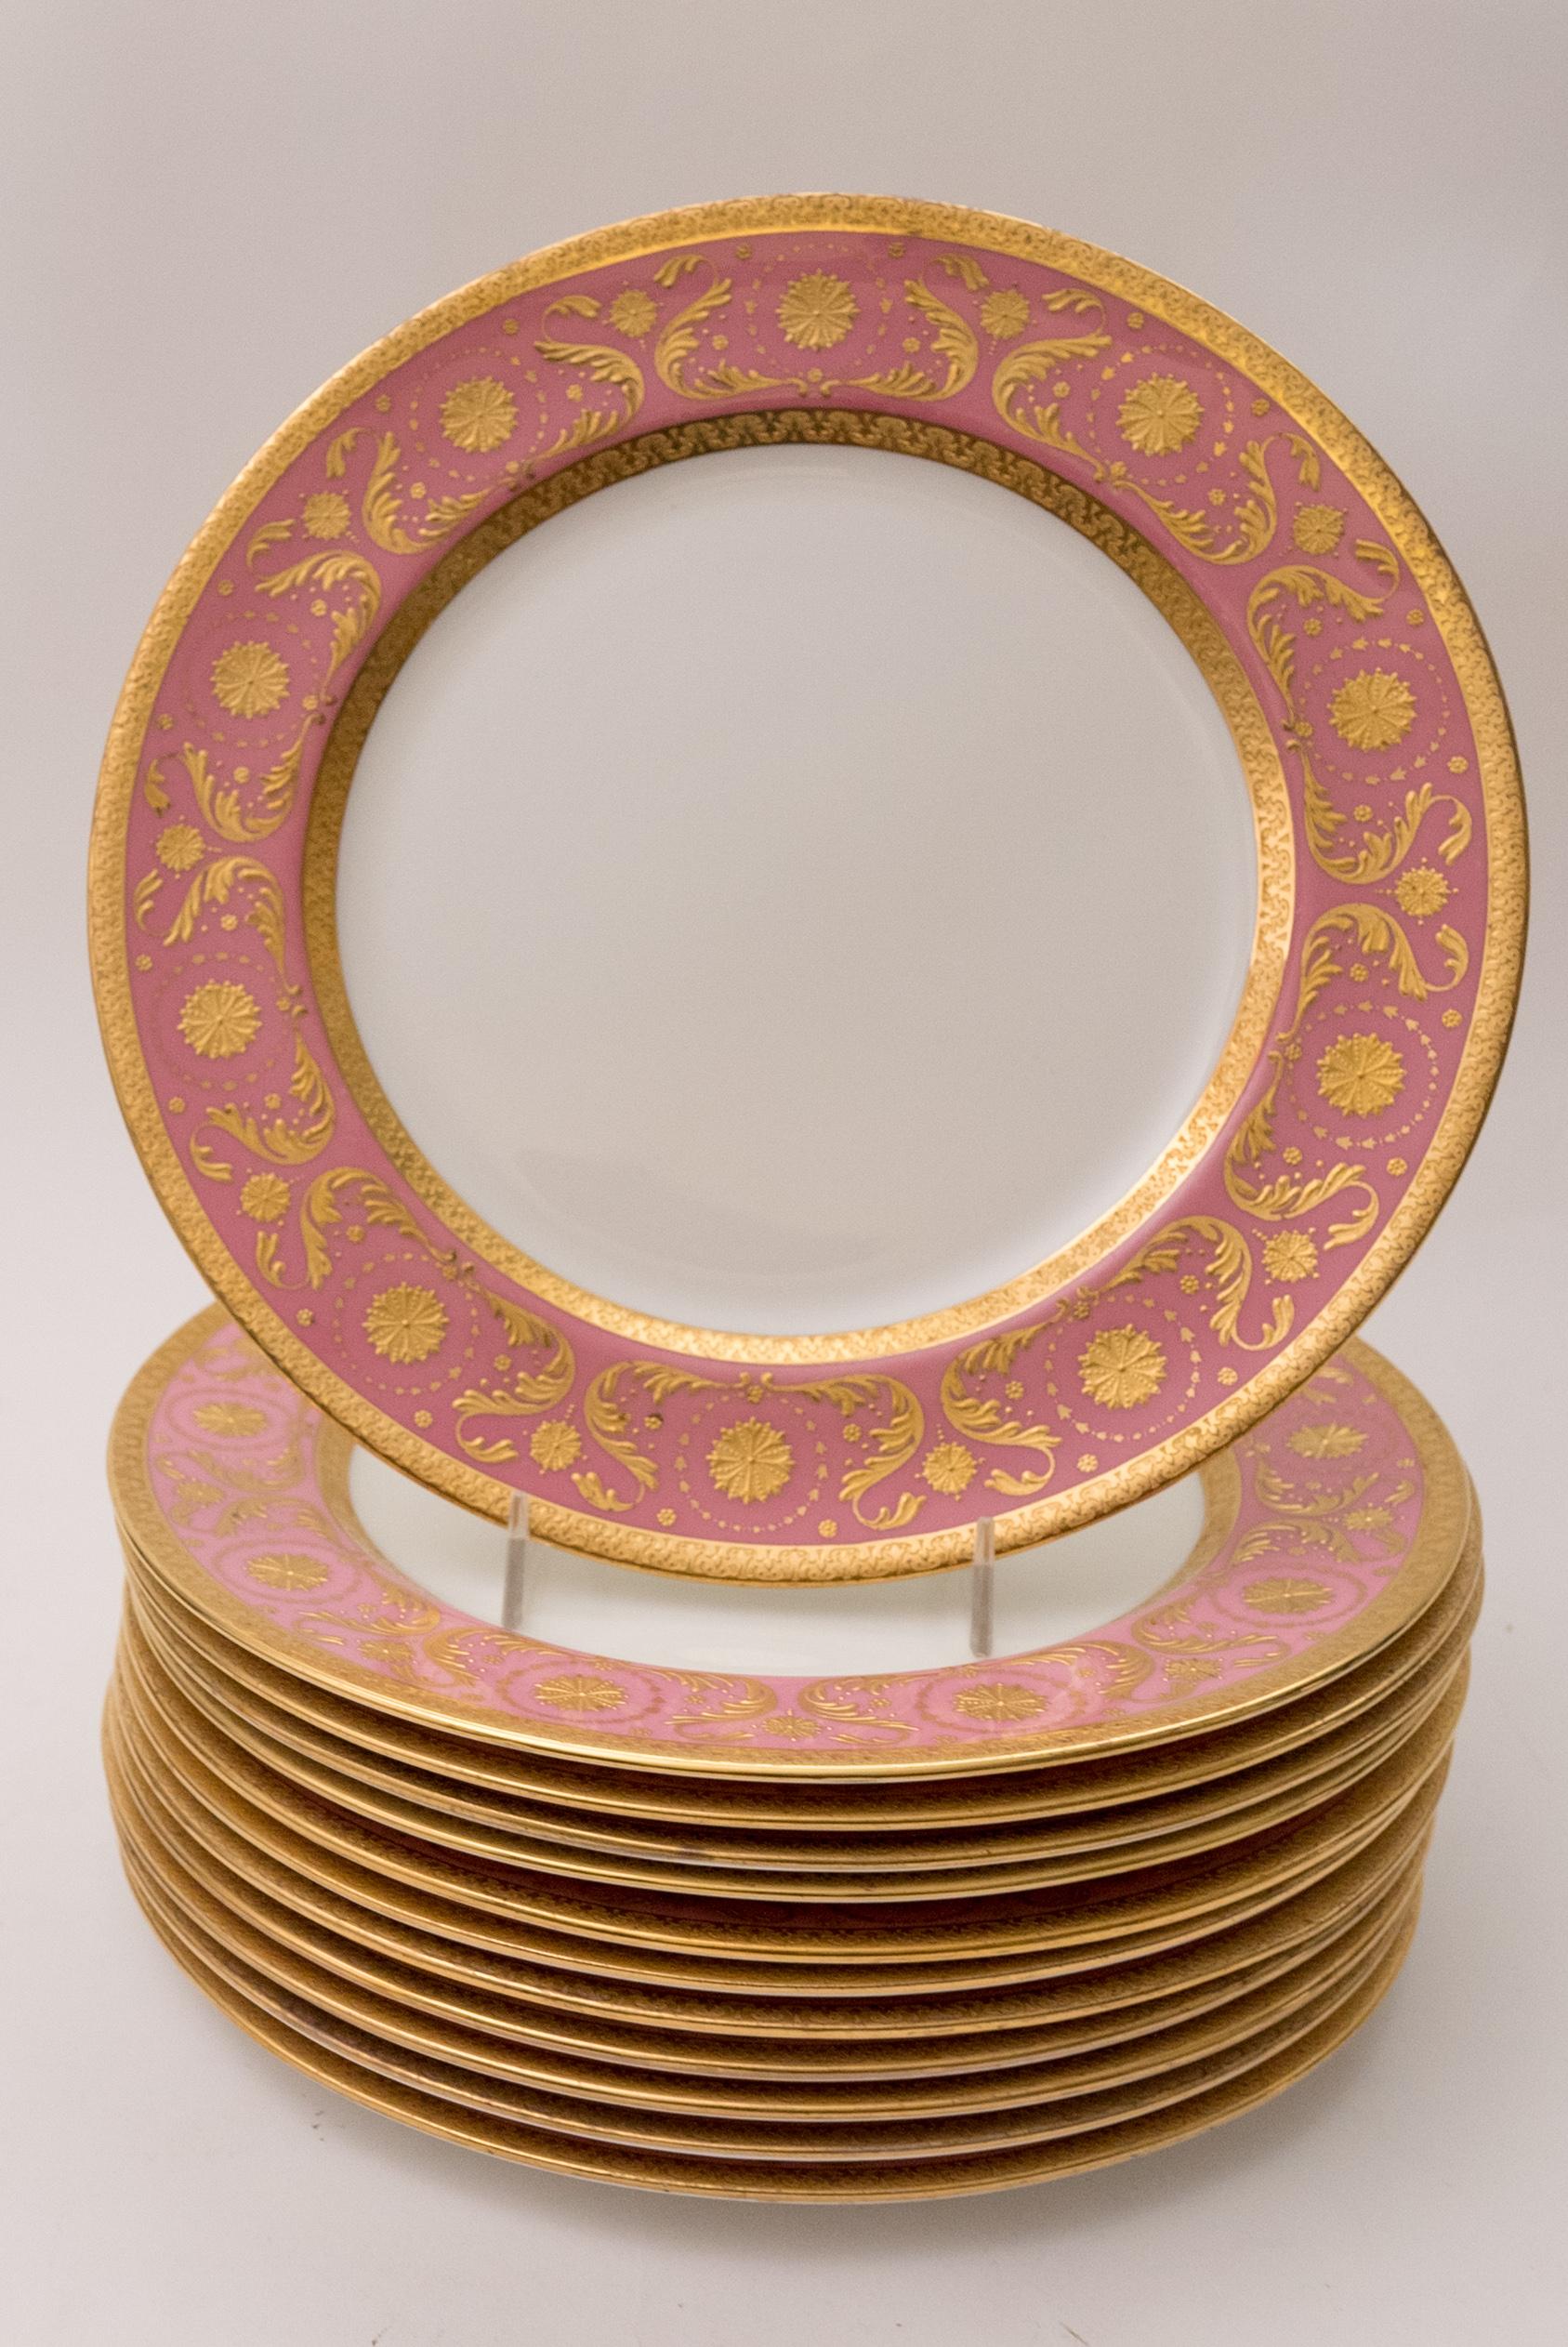 A pretty pink set of twelve dinner plates by one of England's re known firms, Royal Doulton and custom ordered through the fine Gilded Age retailer of Ovington Brothers New York. Lots of great raised paste gilding on their vibrantly colored collars